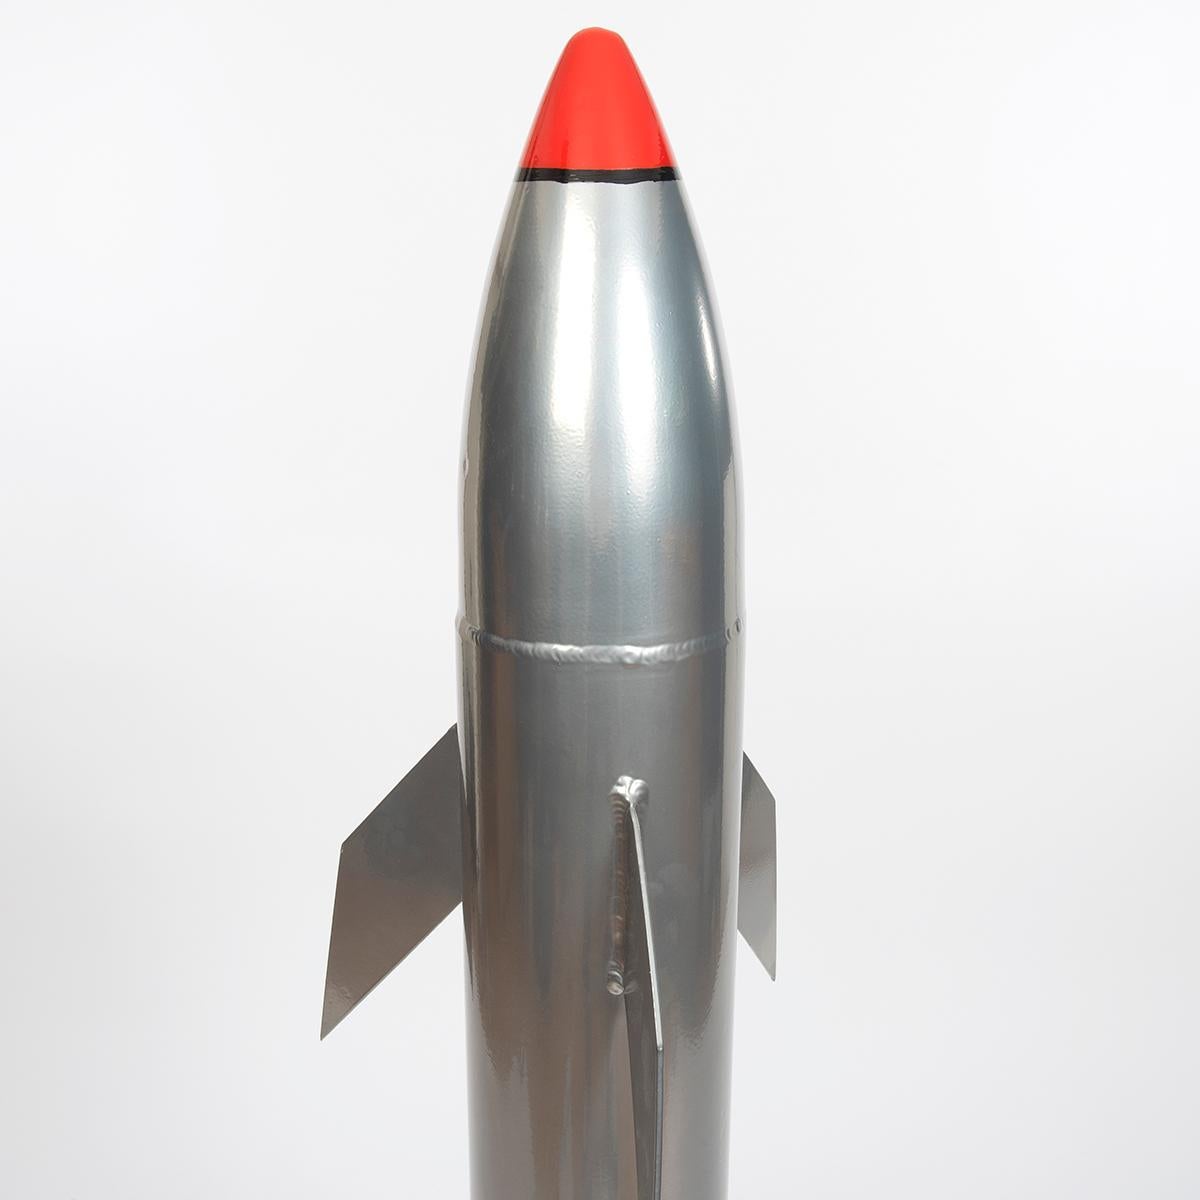 Our missile is a mock up, made by a university engineering team to demonstrate the complexity and skill involved to create and manufacture aluminium to aluminium welding. A great conversation starter.

Specification : 140cm high, 46cm wide and 40cm